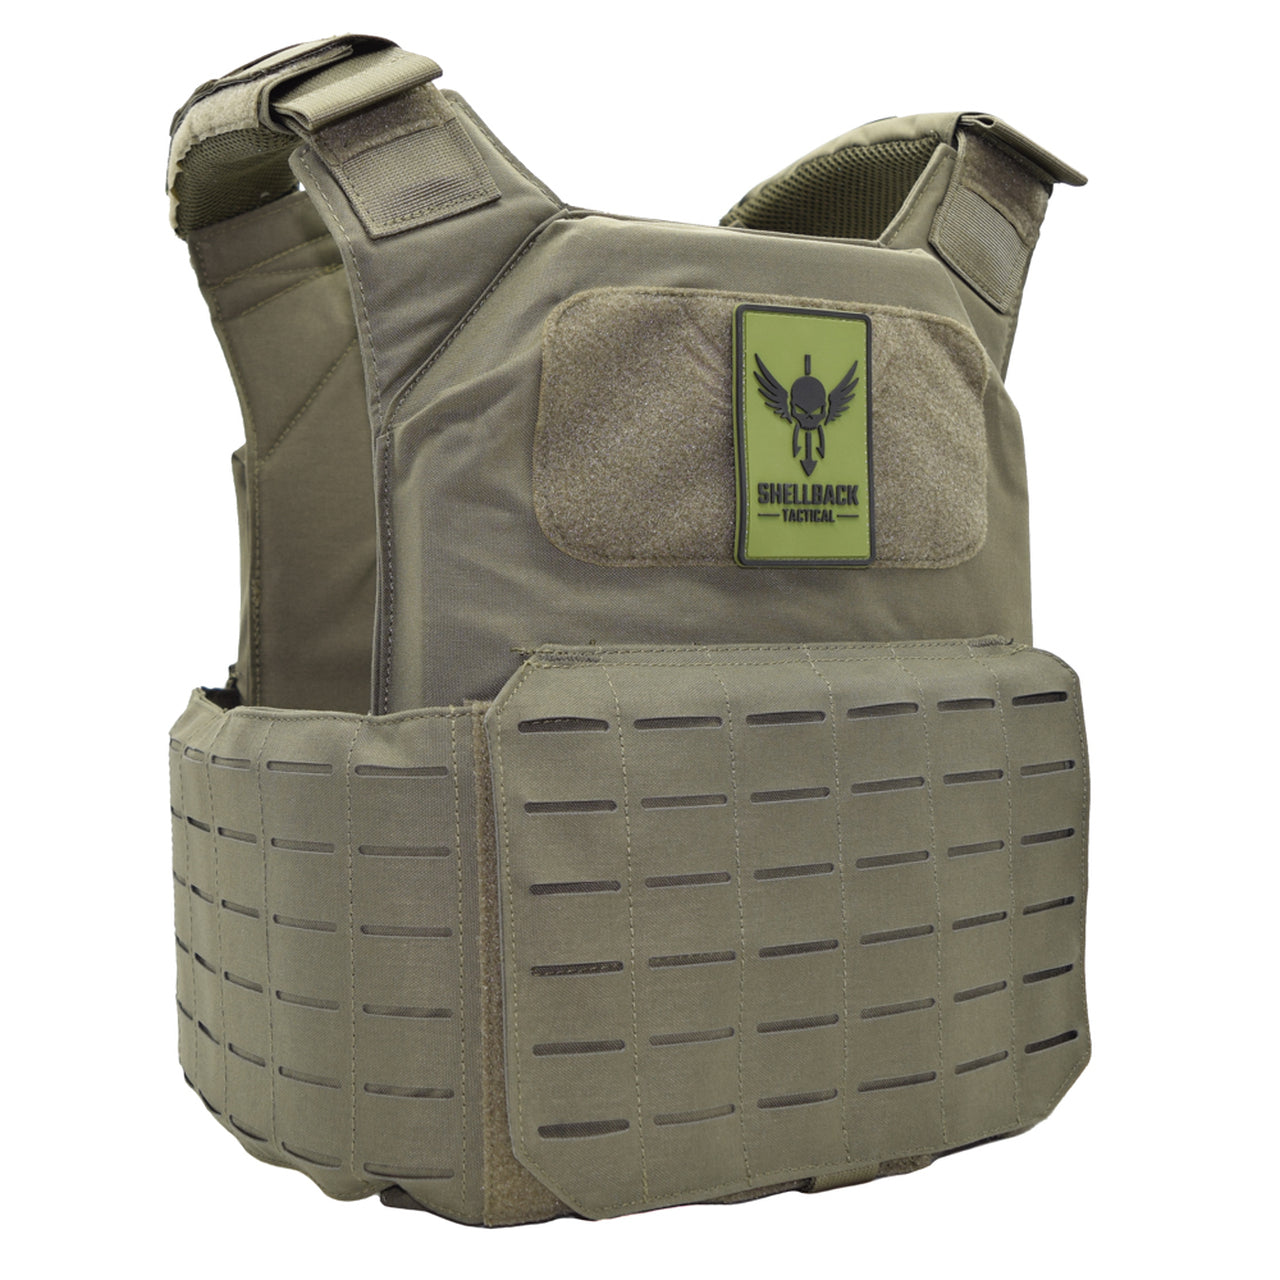 A Shellback Tactical Shield 2.0 Plate Carrier with a green logo on it.